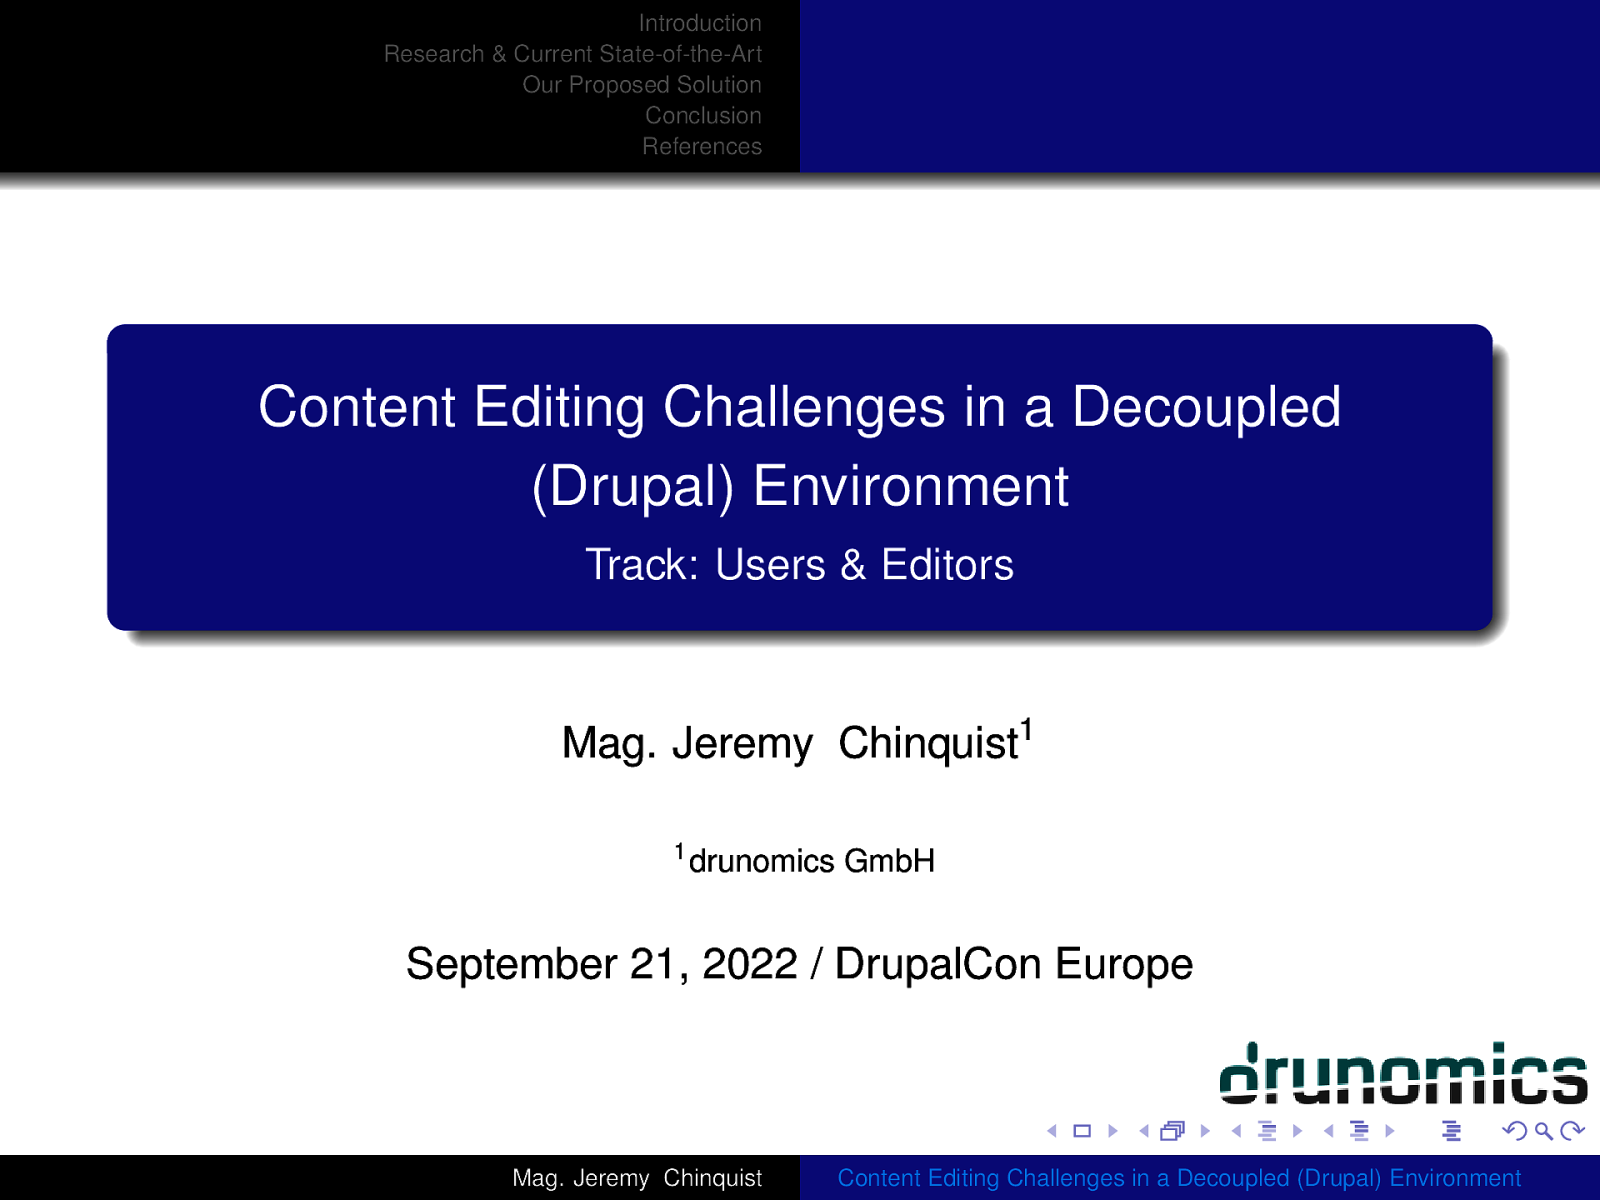 Content Editing Challenges in a Decoupled (Drupal) Environment